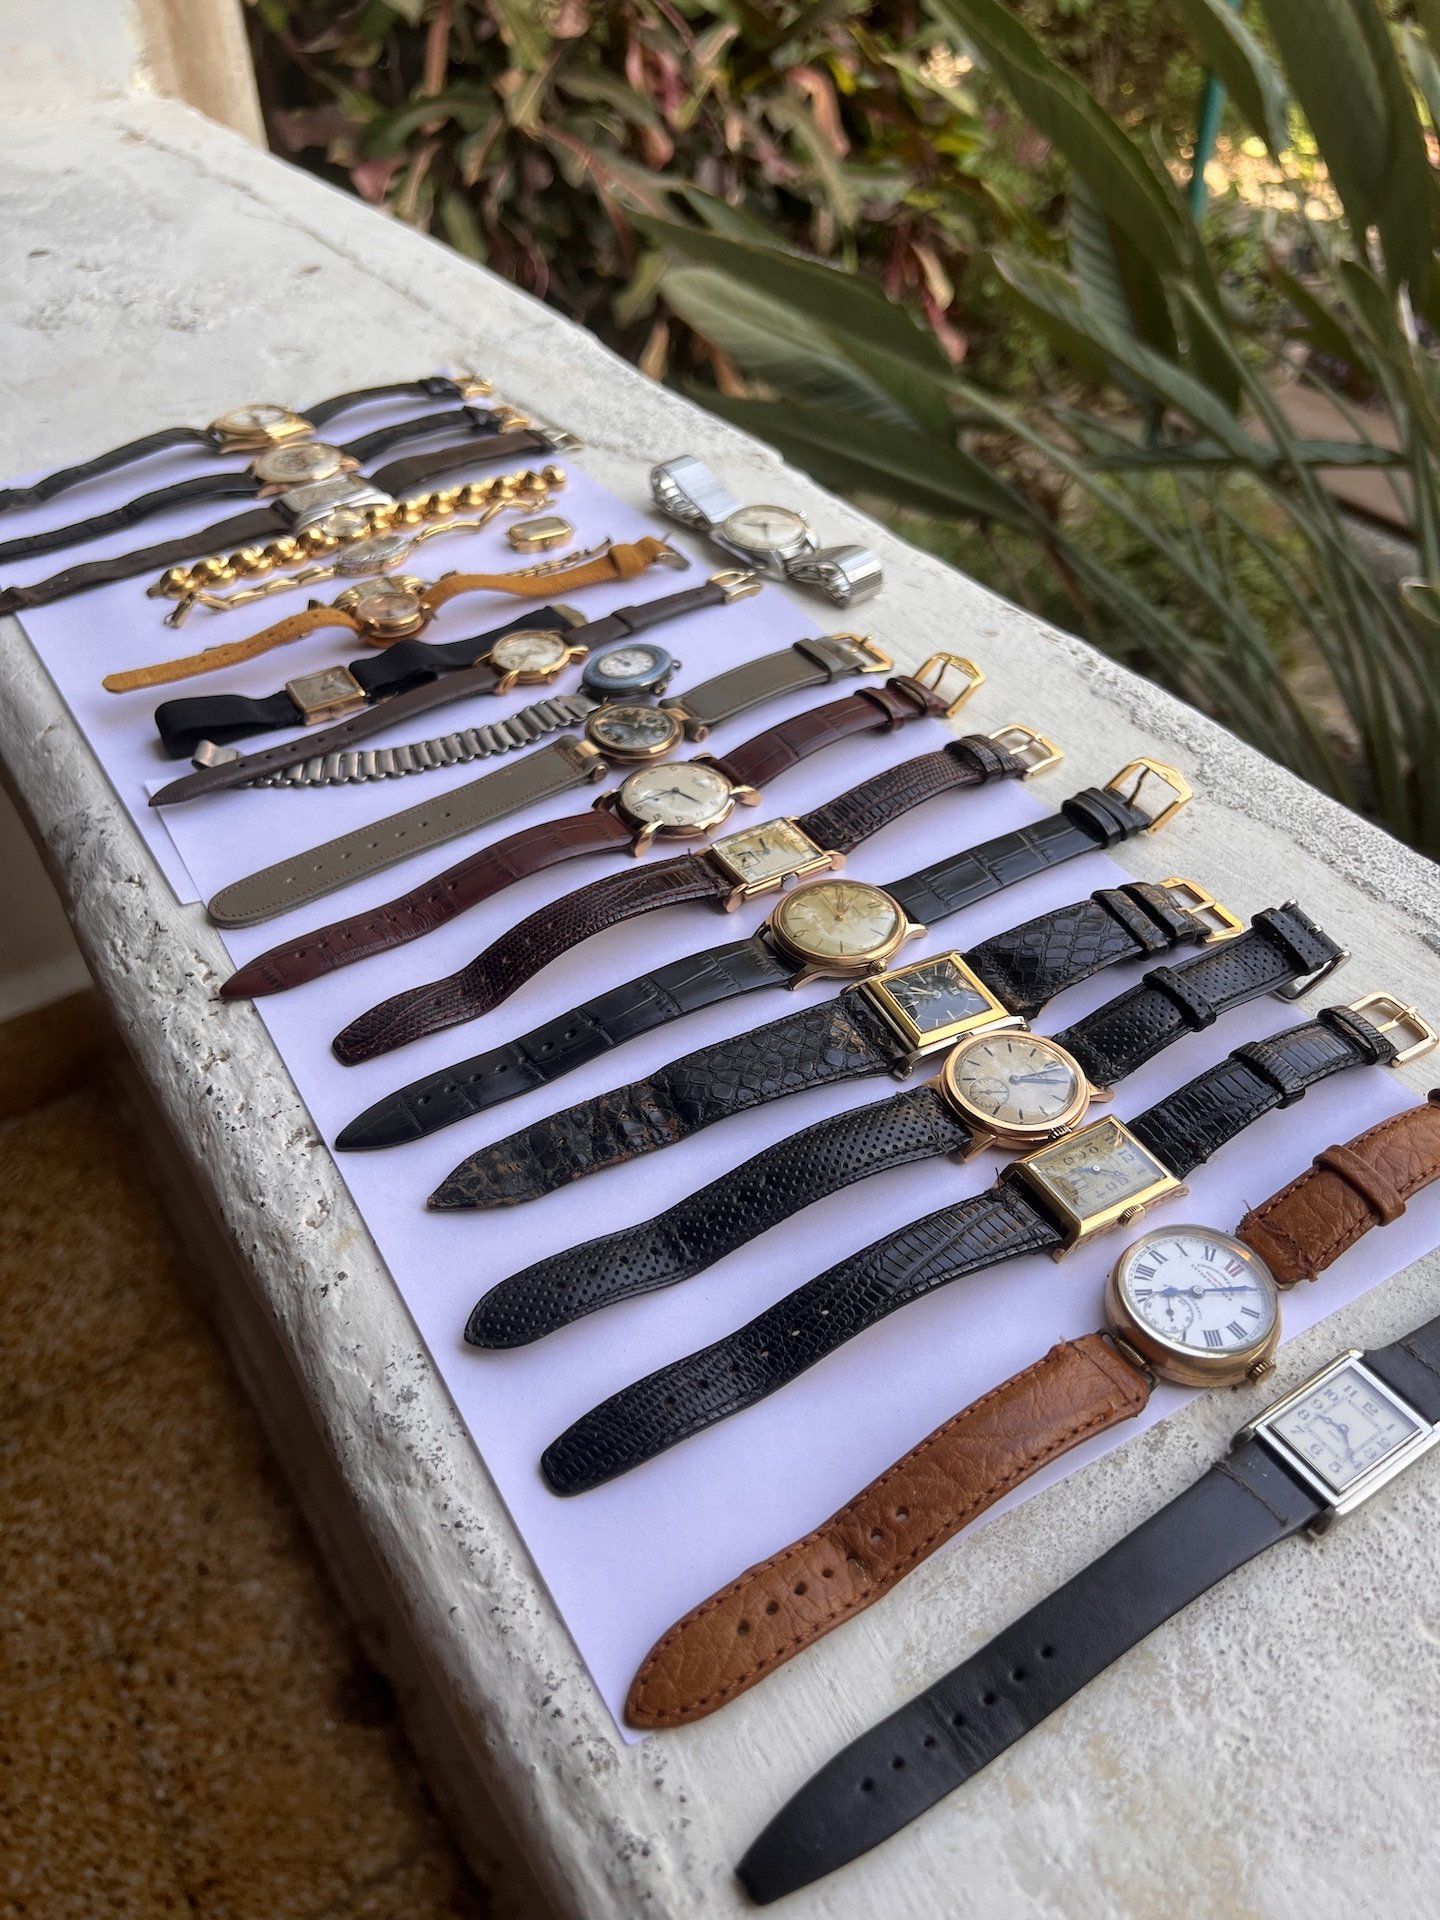 Personal watch collection